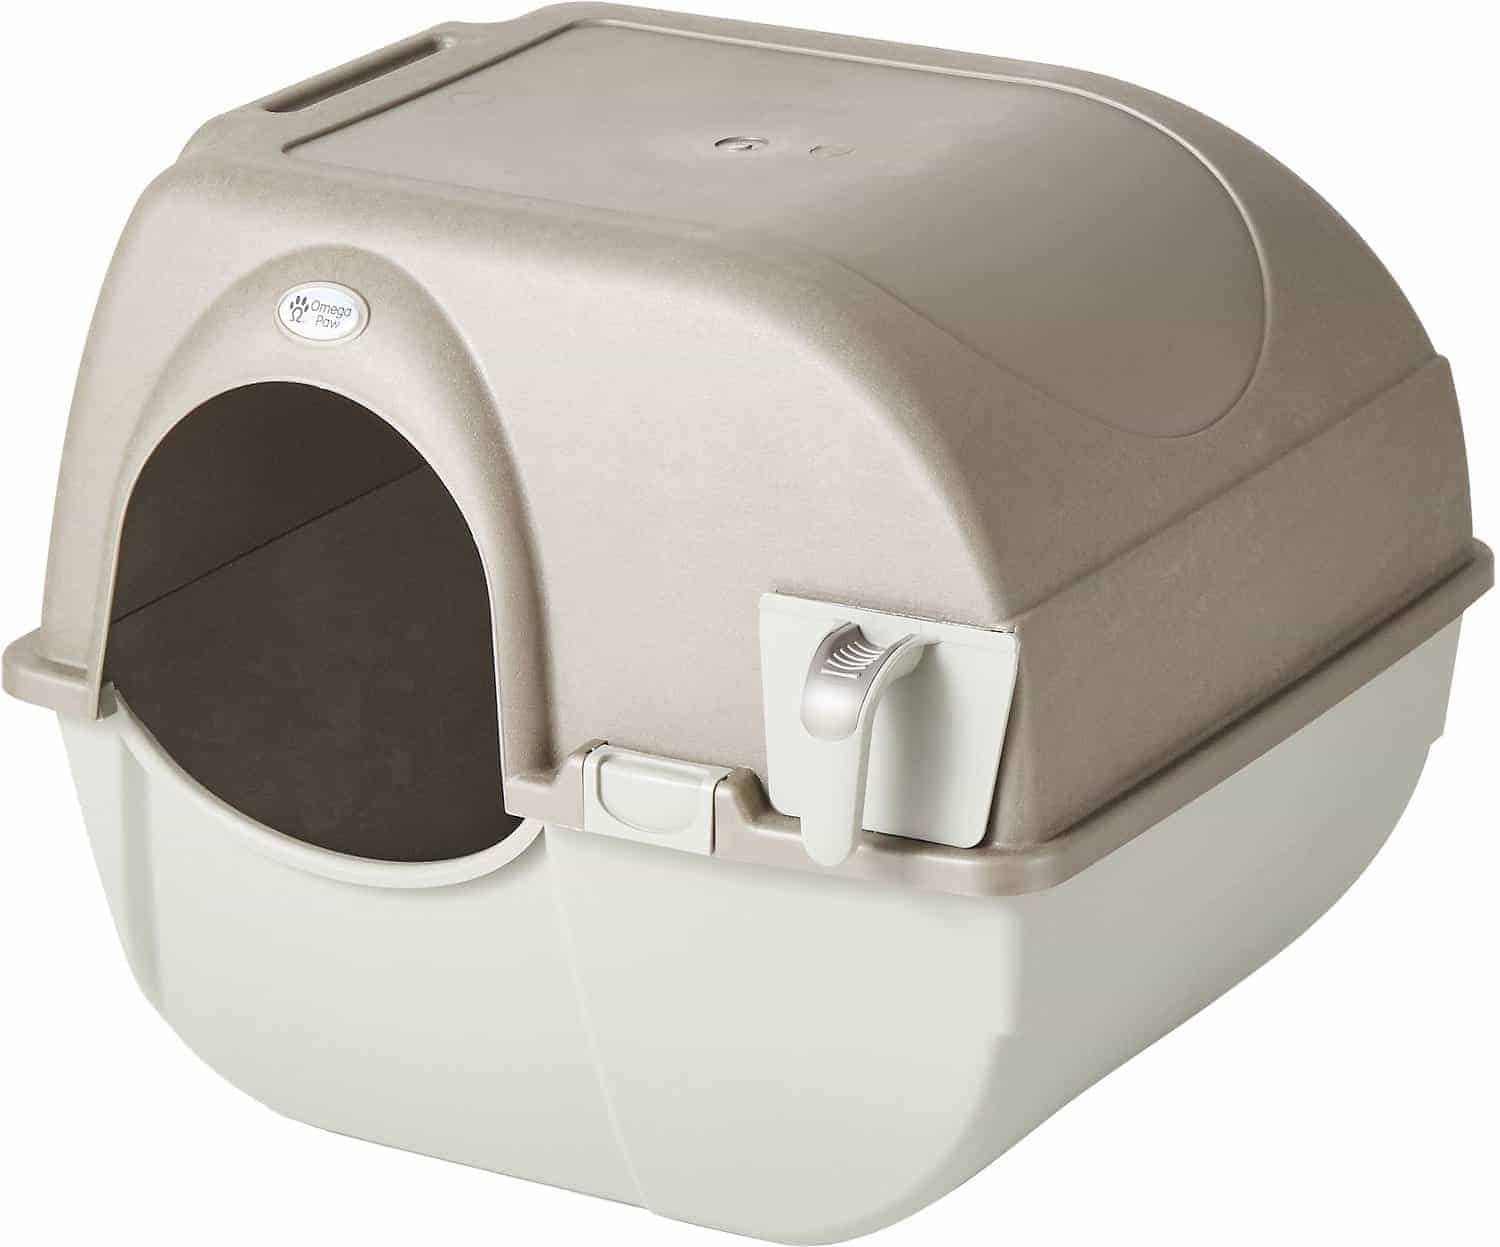 Top 7 Best Automatic Litter Box For Self Cleaning [2020 Update] 13